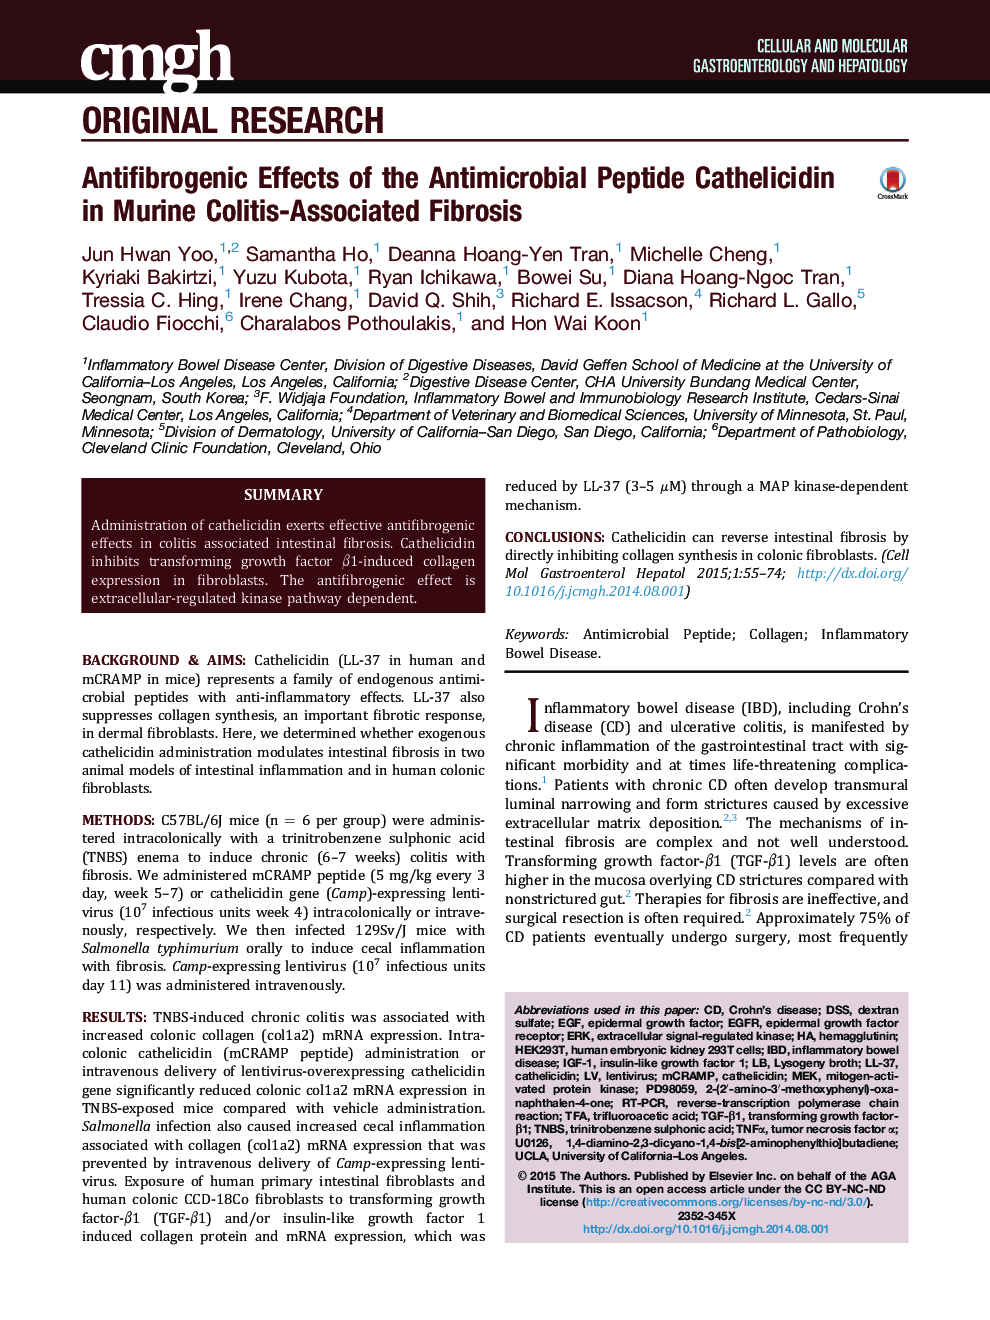 Antifibrogenic Effects of the Antimicrobial Peptide Cathelicidin in Murine Colitis-Associated Fibrosis